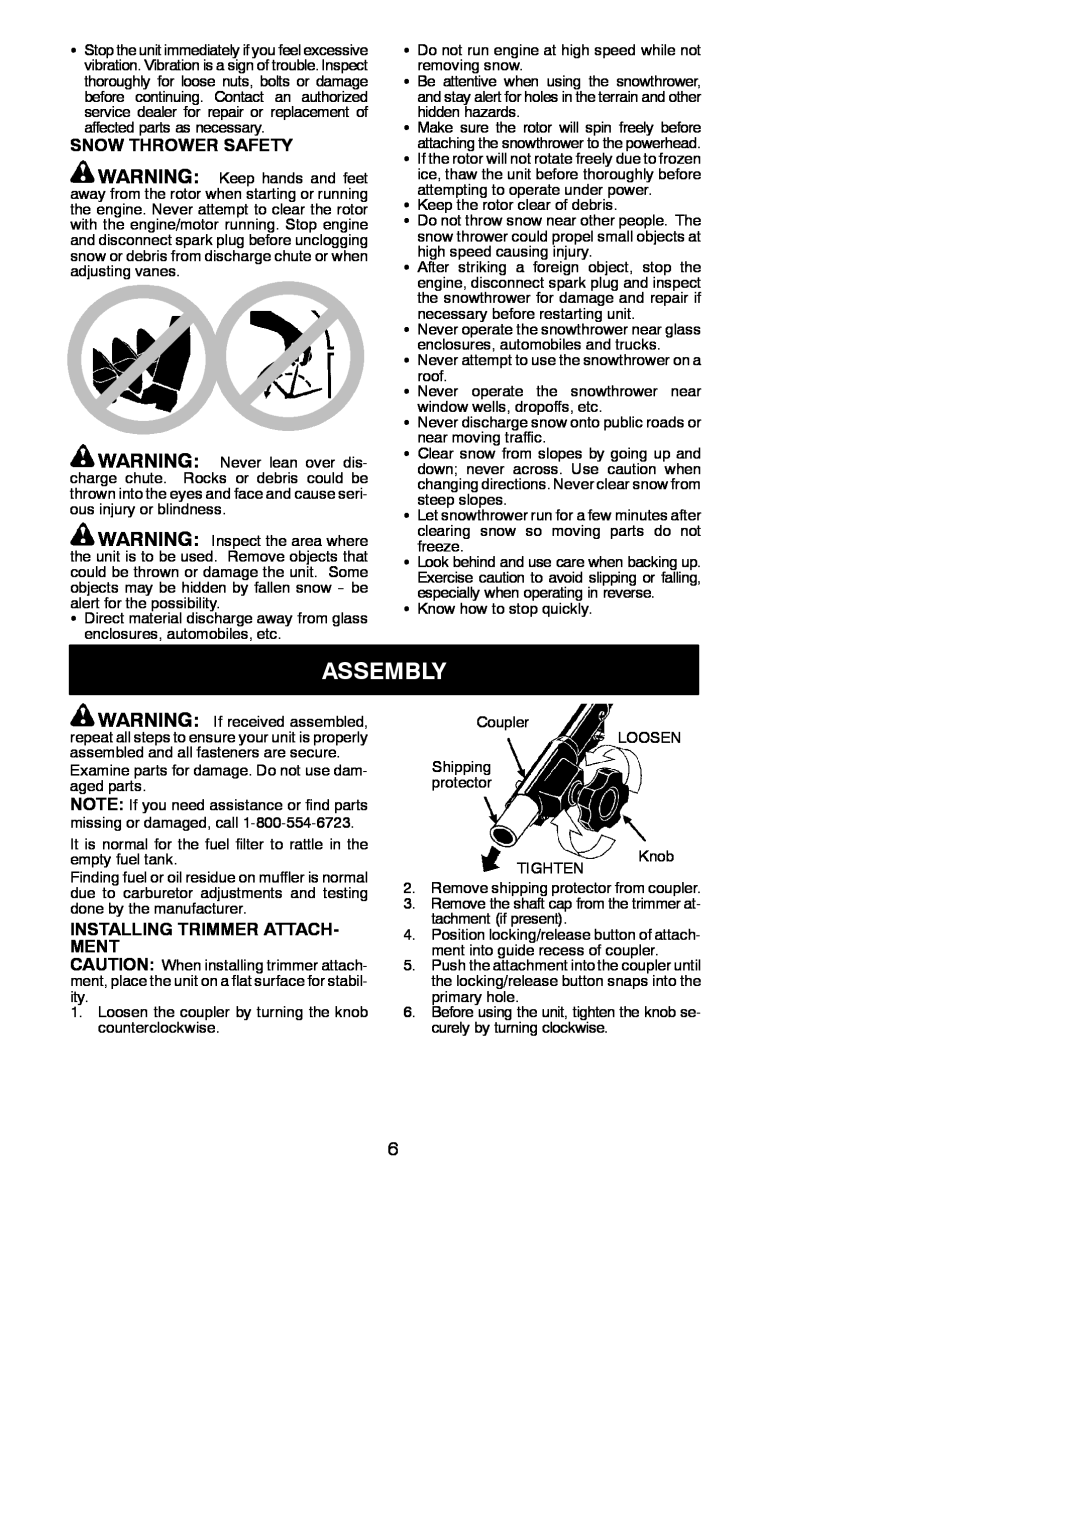 Poulan 545137277 instruction manual Assembly, Snow Thrower Safety, Installing Trimmer Attach- Ment 